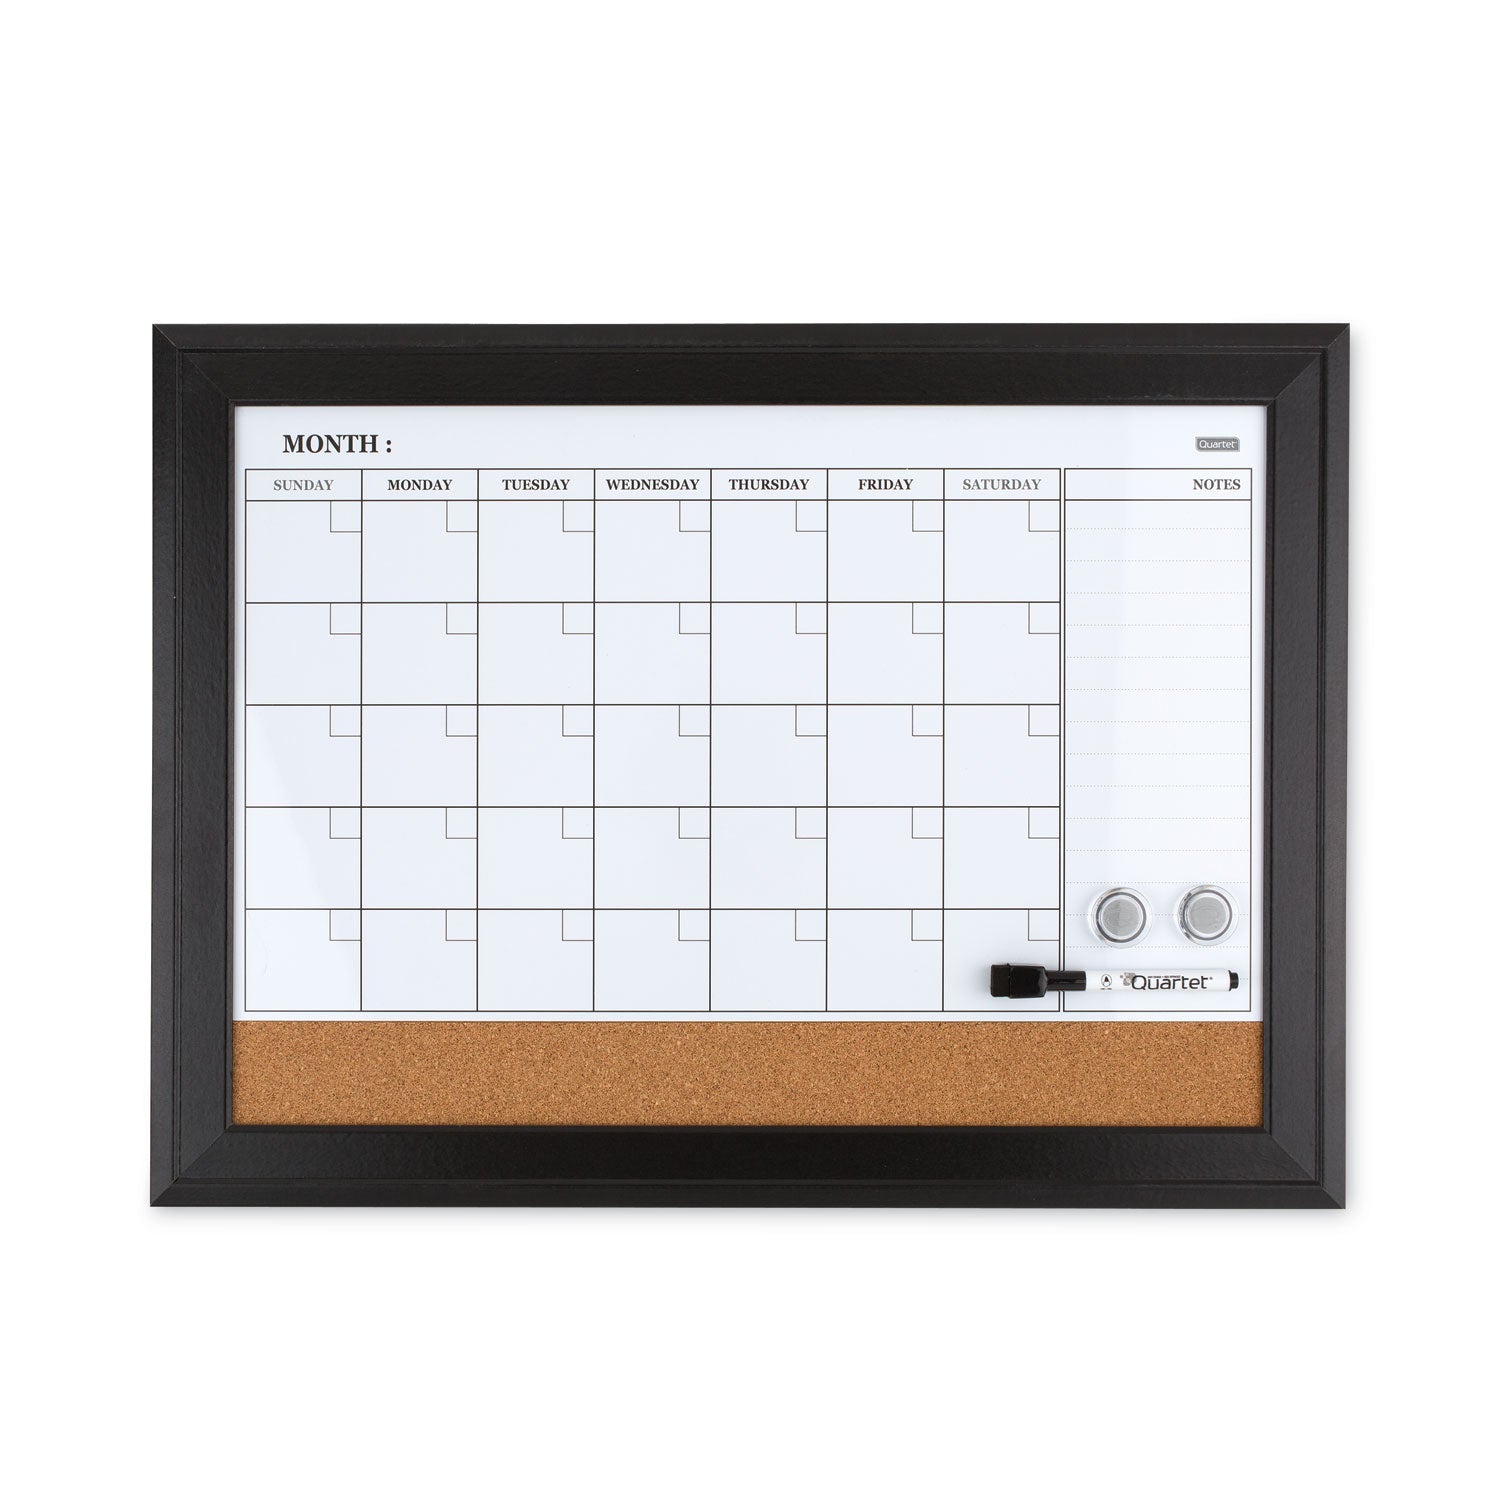 home-decor-magnetic-combo-dry-erase-board-with-cork-board-on-bottom-23-x-17-tan-white-surface-espresso-wood-frame_qrt79275 - 2